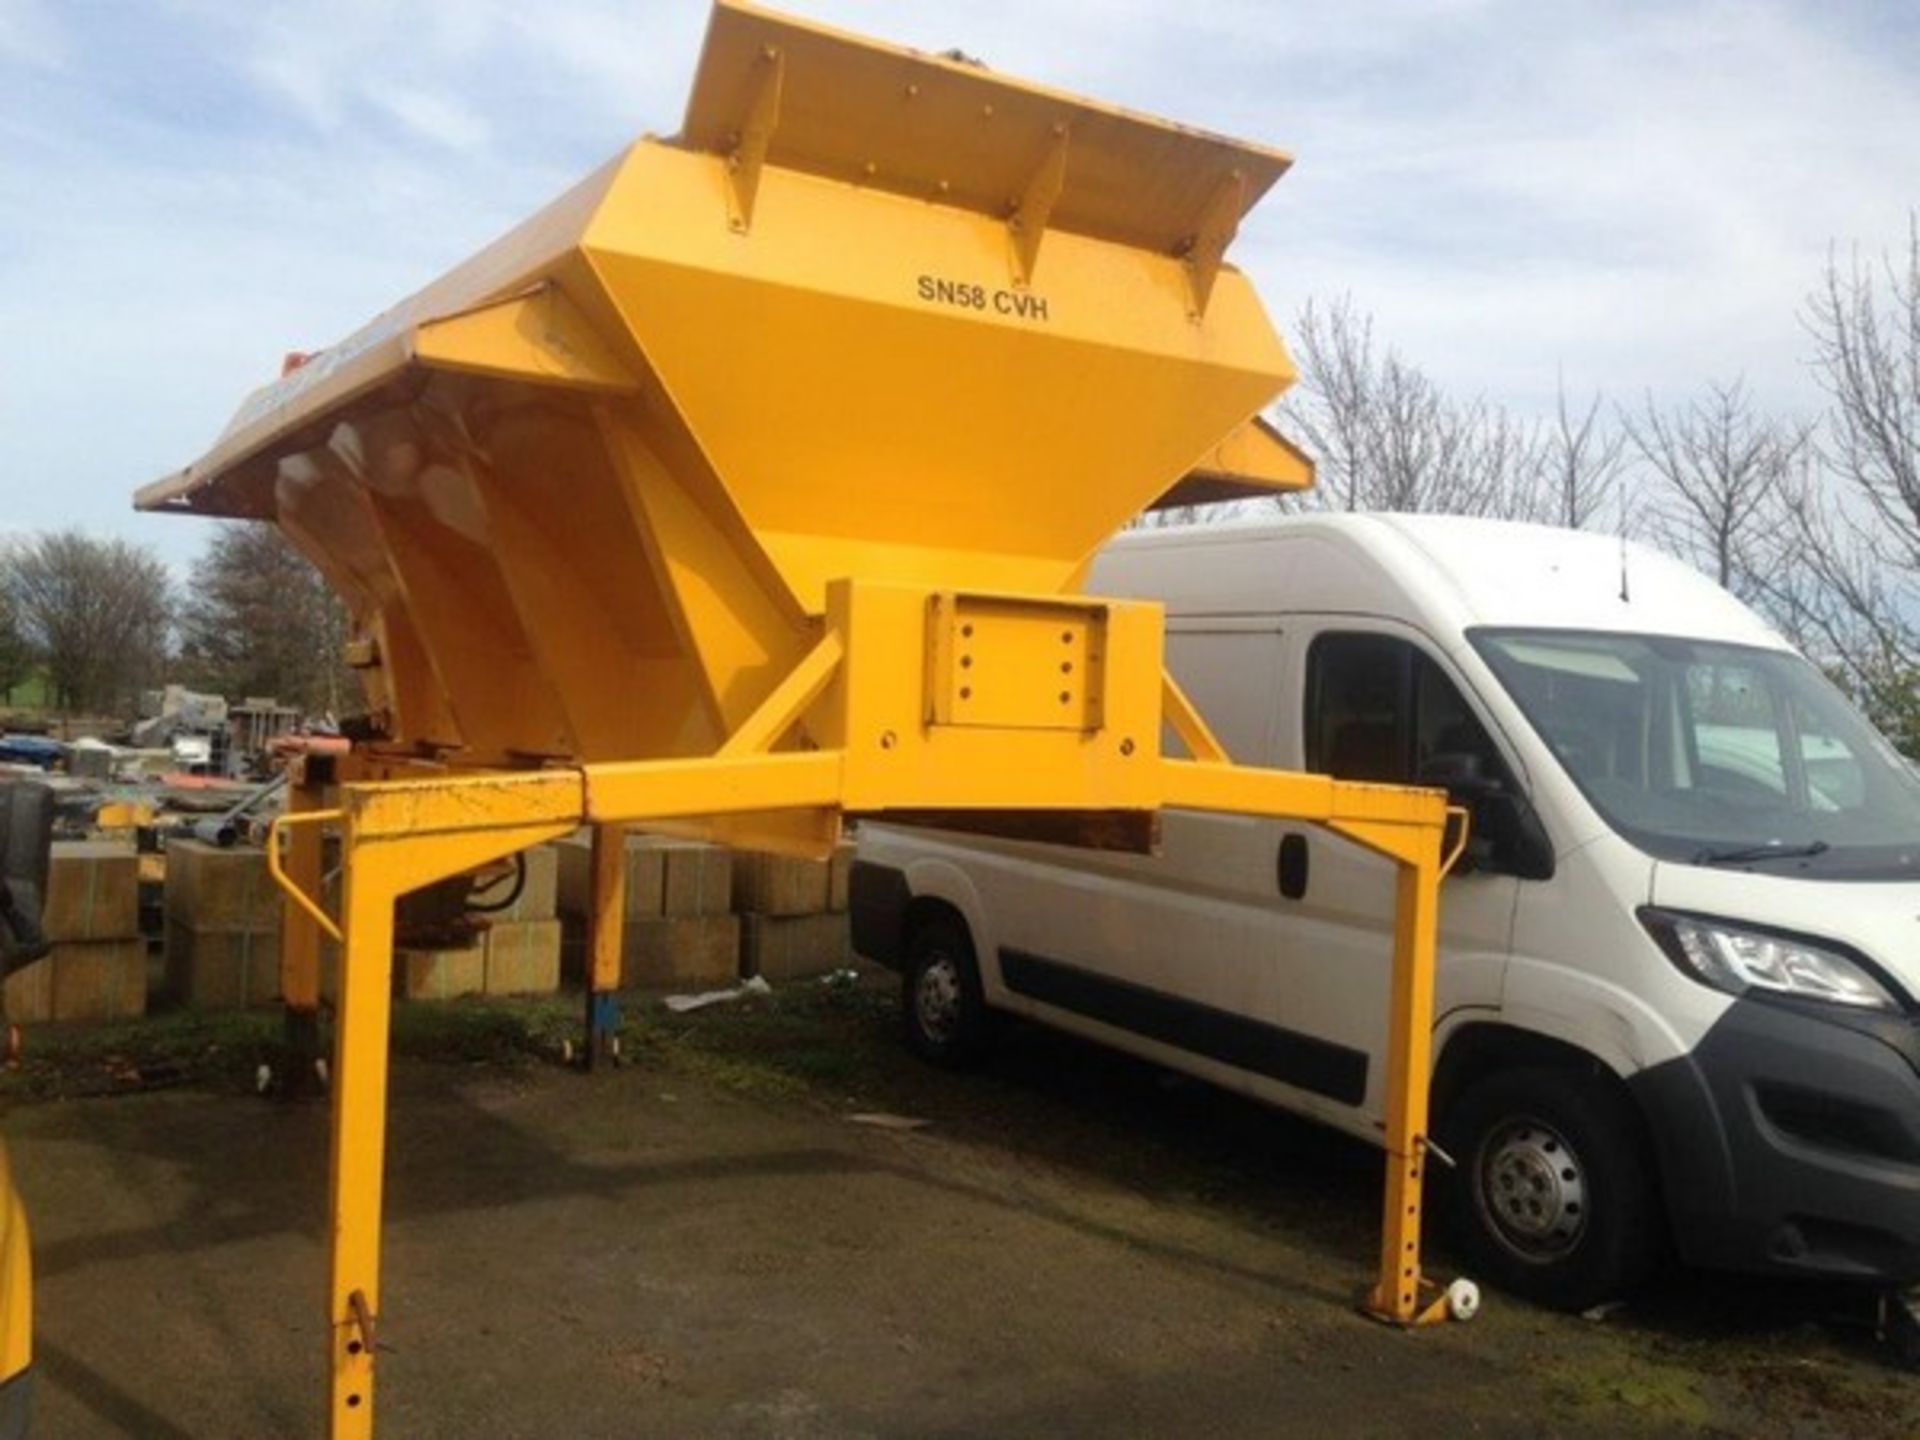 2004 ECON WZCQHJ46 body gritter s/n 37770 Reg No SN58 CVH (861) **To be sold from Errol auction s - Image 6 of 12